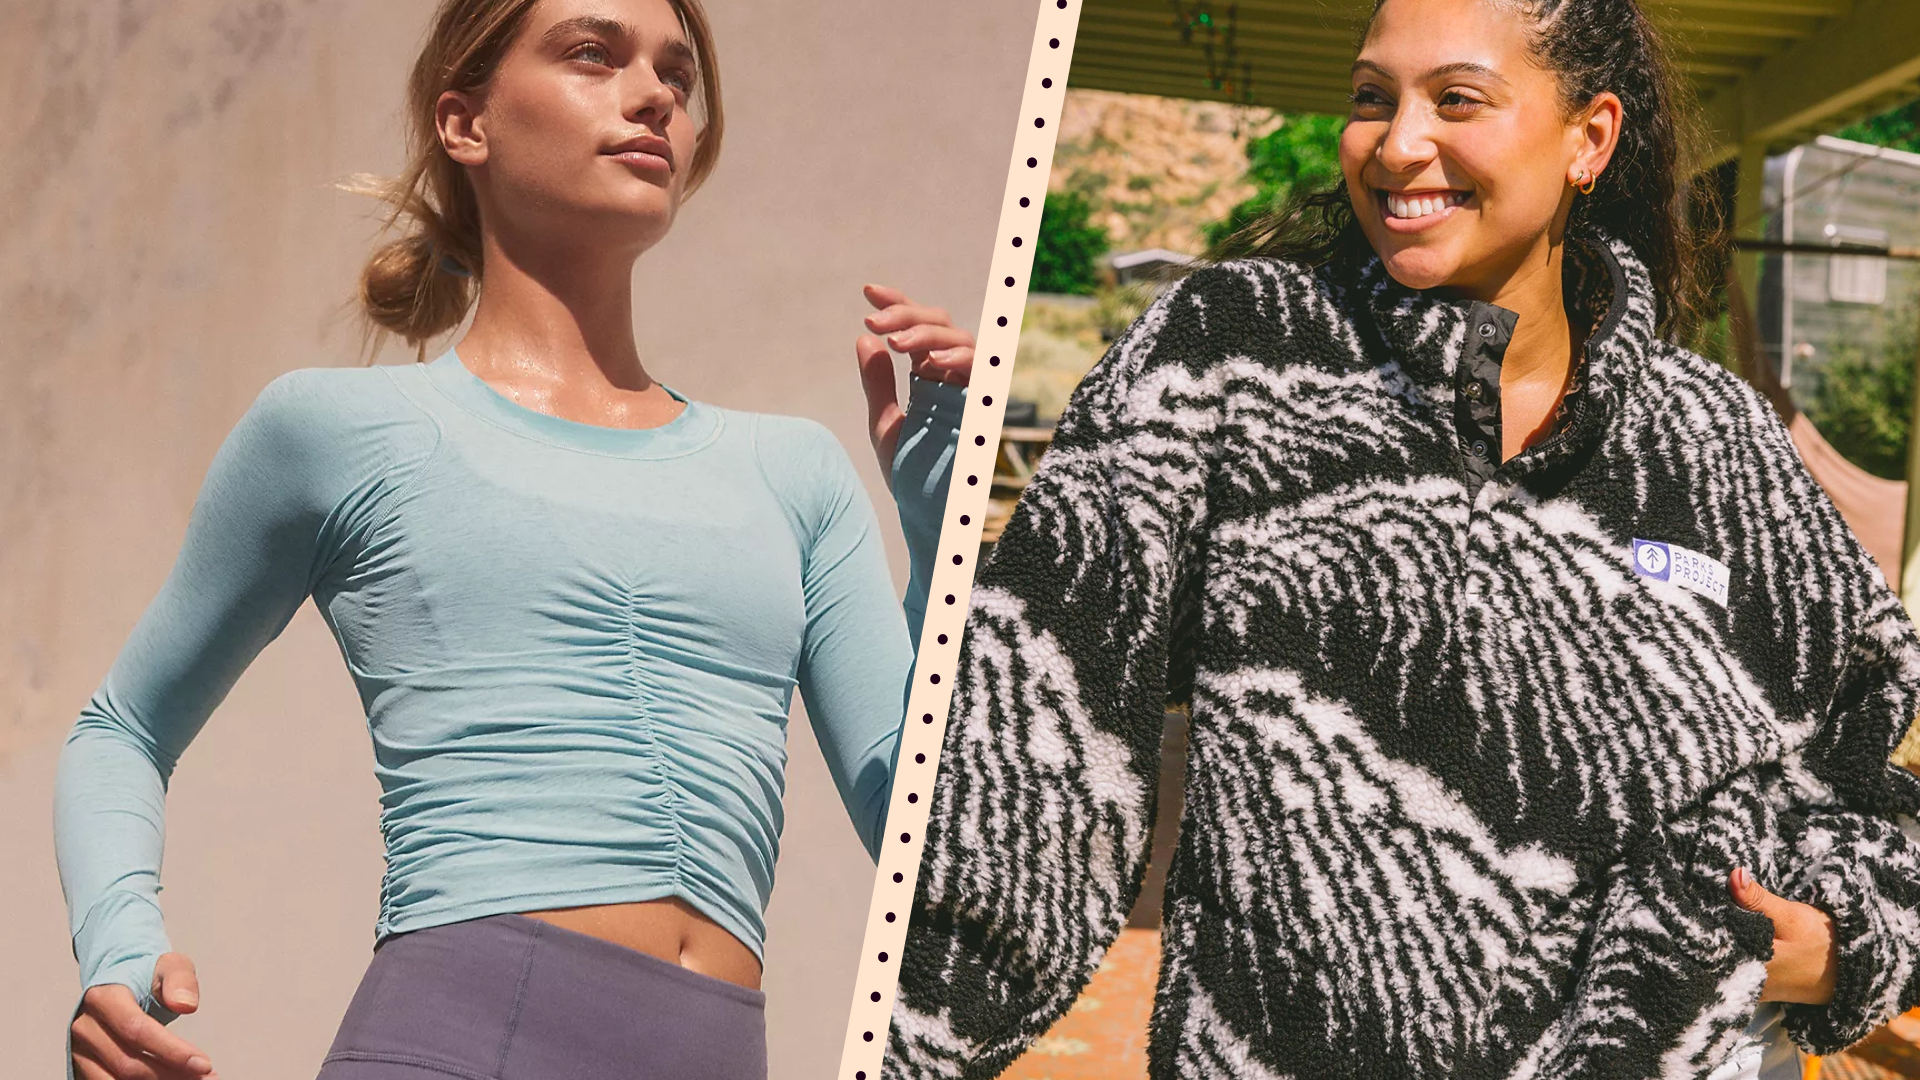 16 Winter Workout Clothes To Keep You Fit And Warm TODAY, 45% OFF